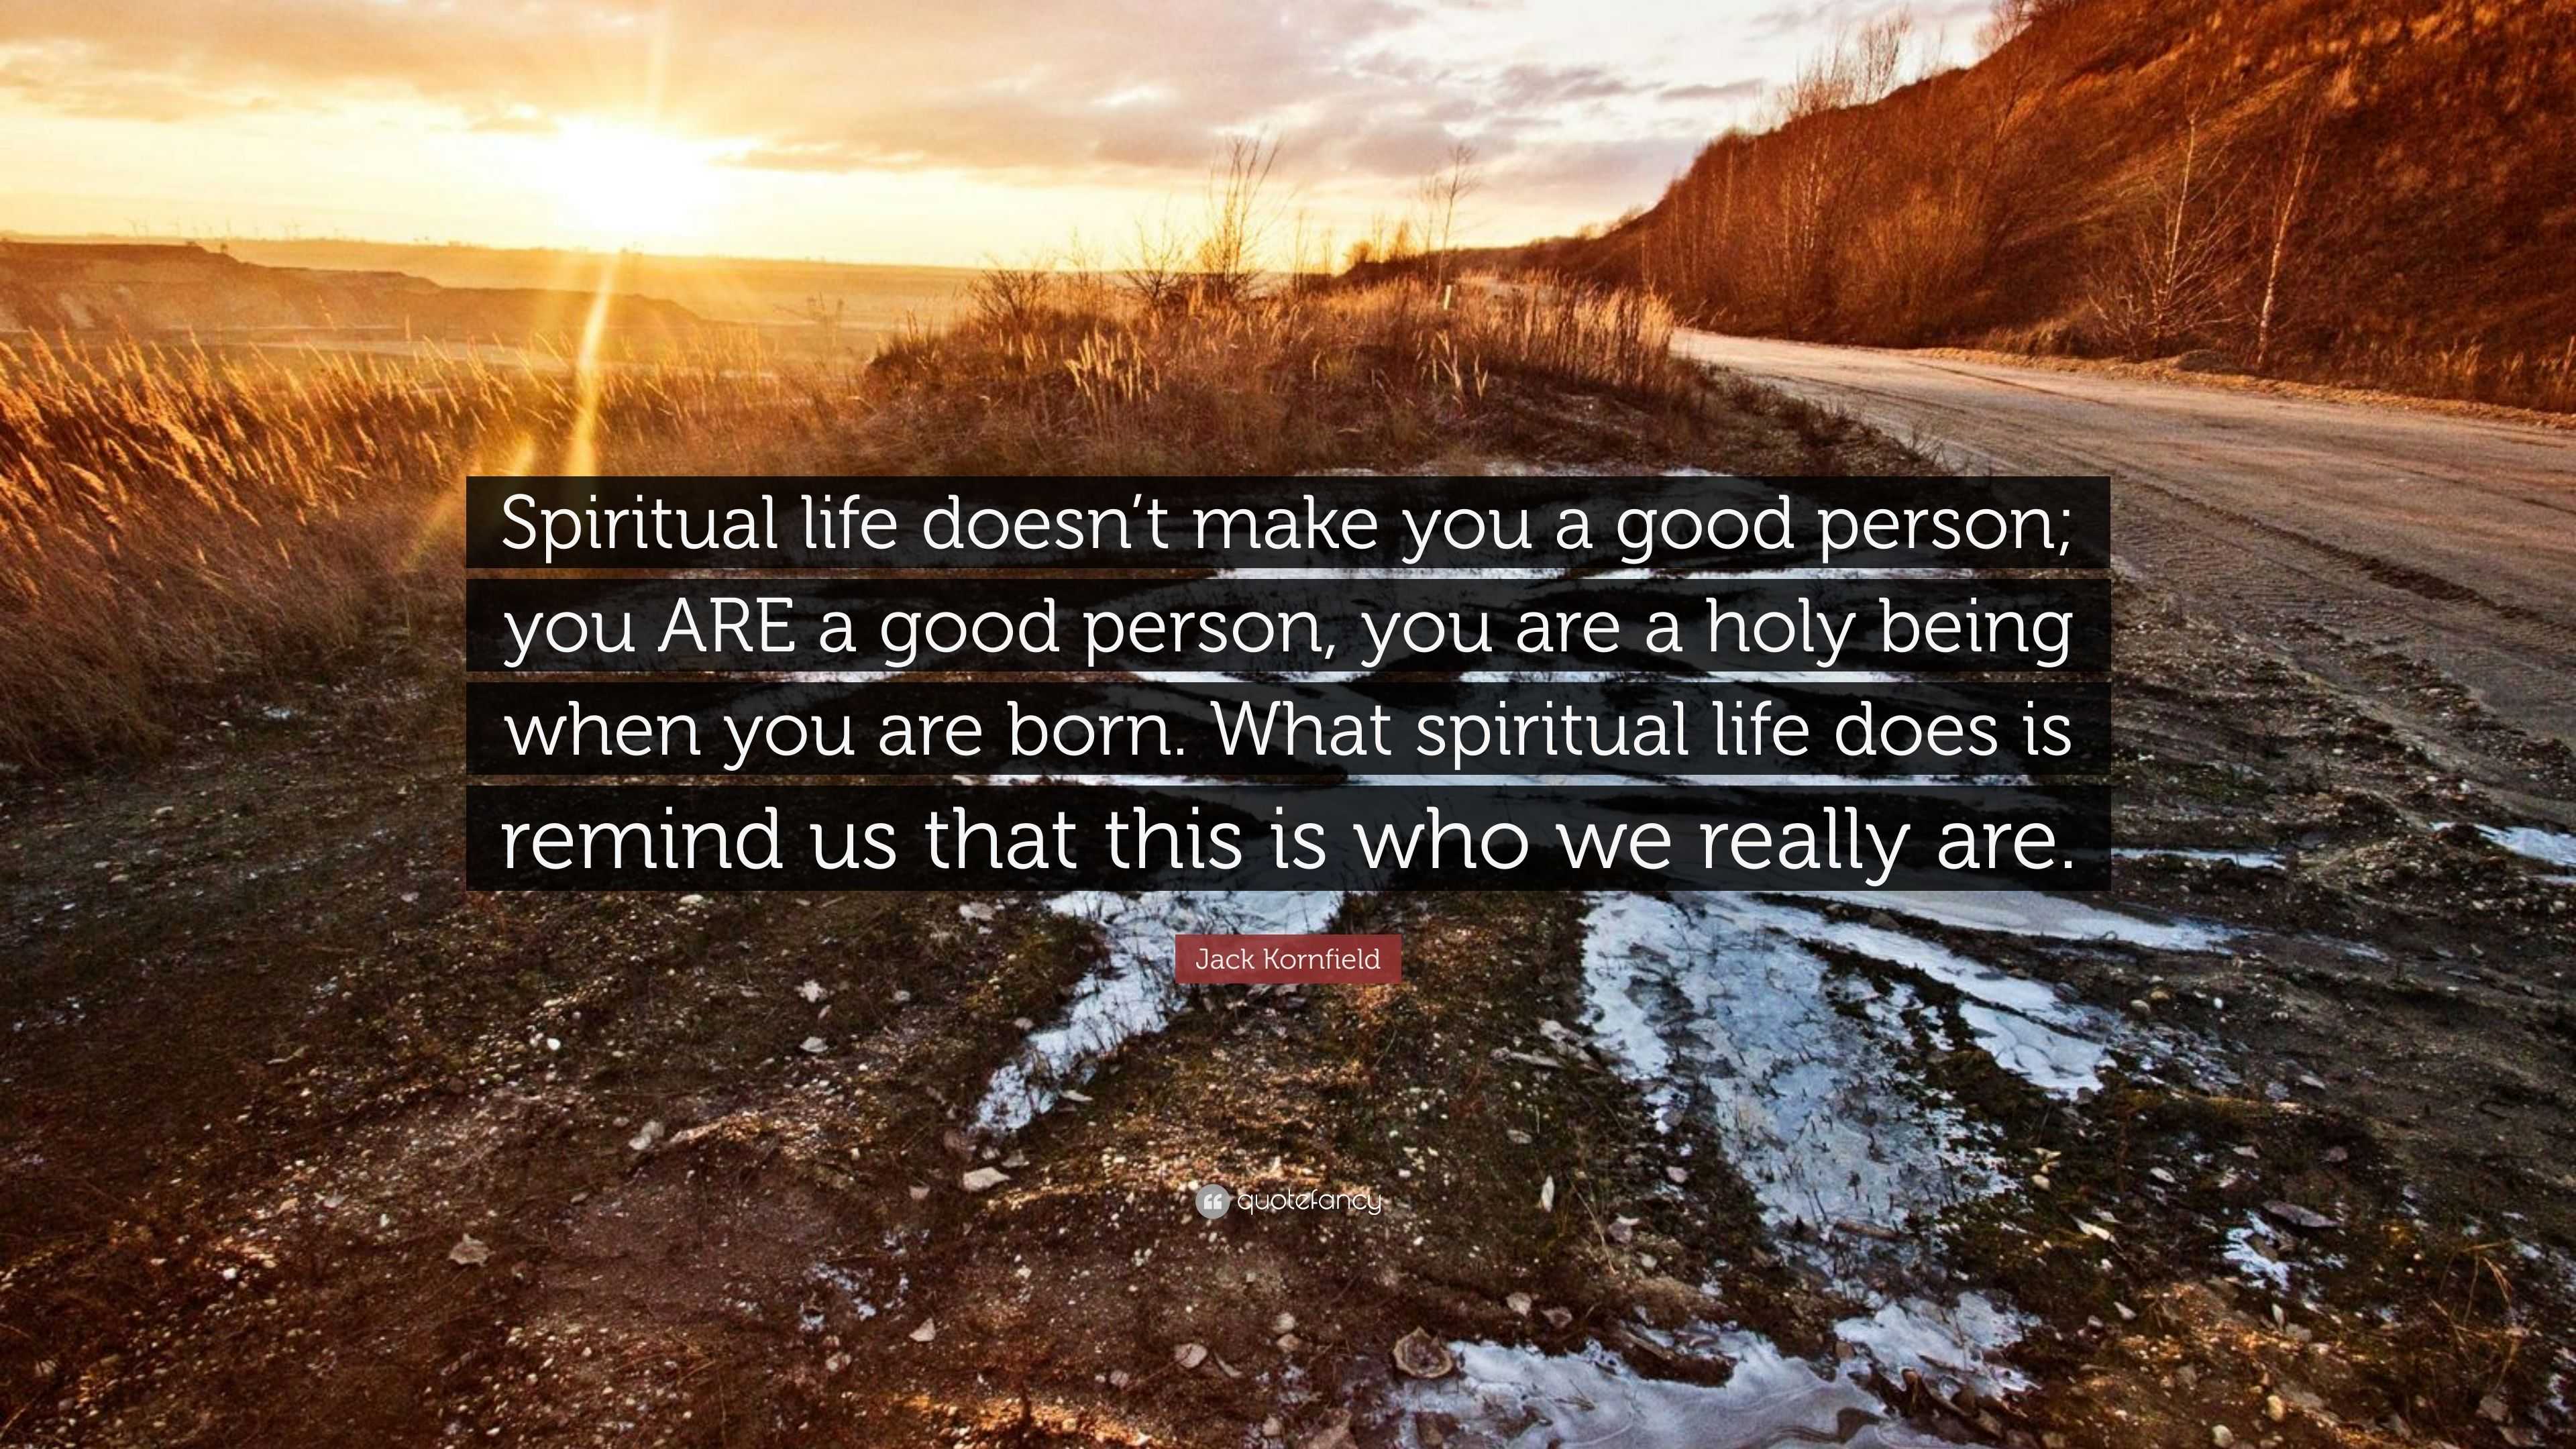 Jack Kornfield Quote Spiritual Life Doesn T Make You A Good Person You Are A Good Person You Are A Holy Being When You Are Born What Spiri